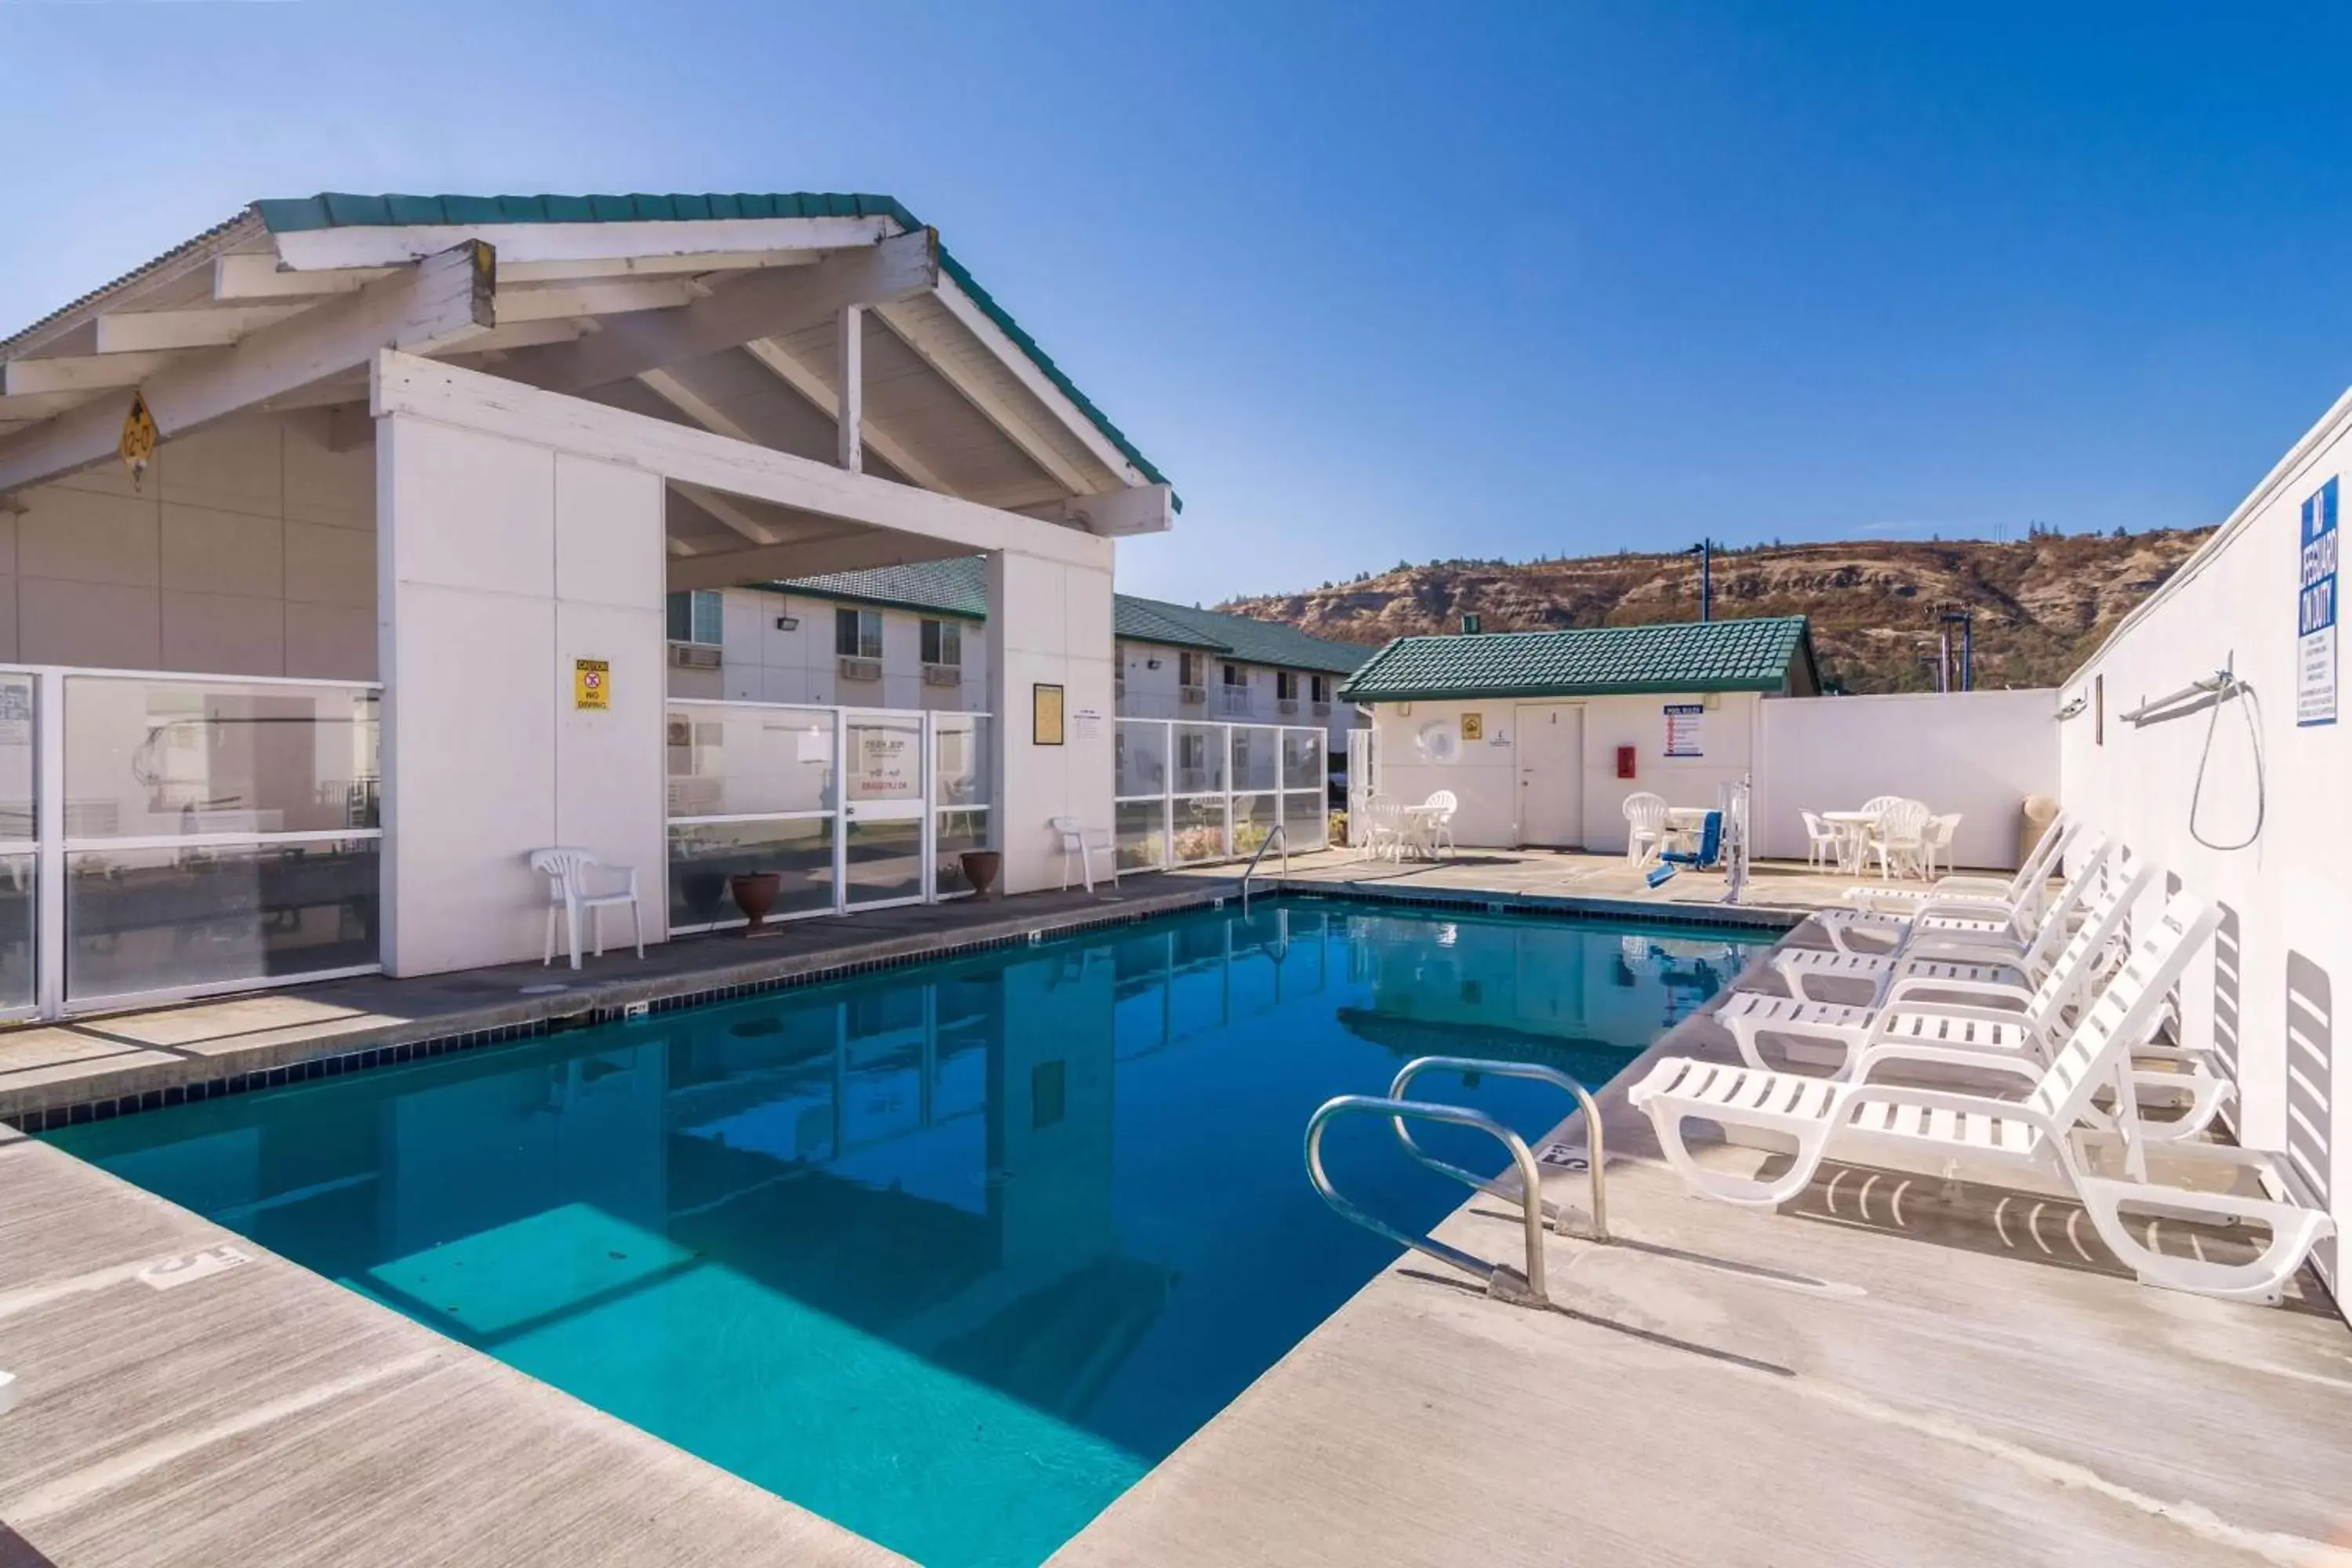 On site, Swimming Pool in Motel 6-The Dalles, OR